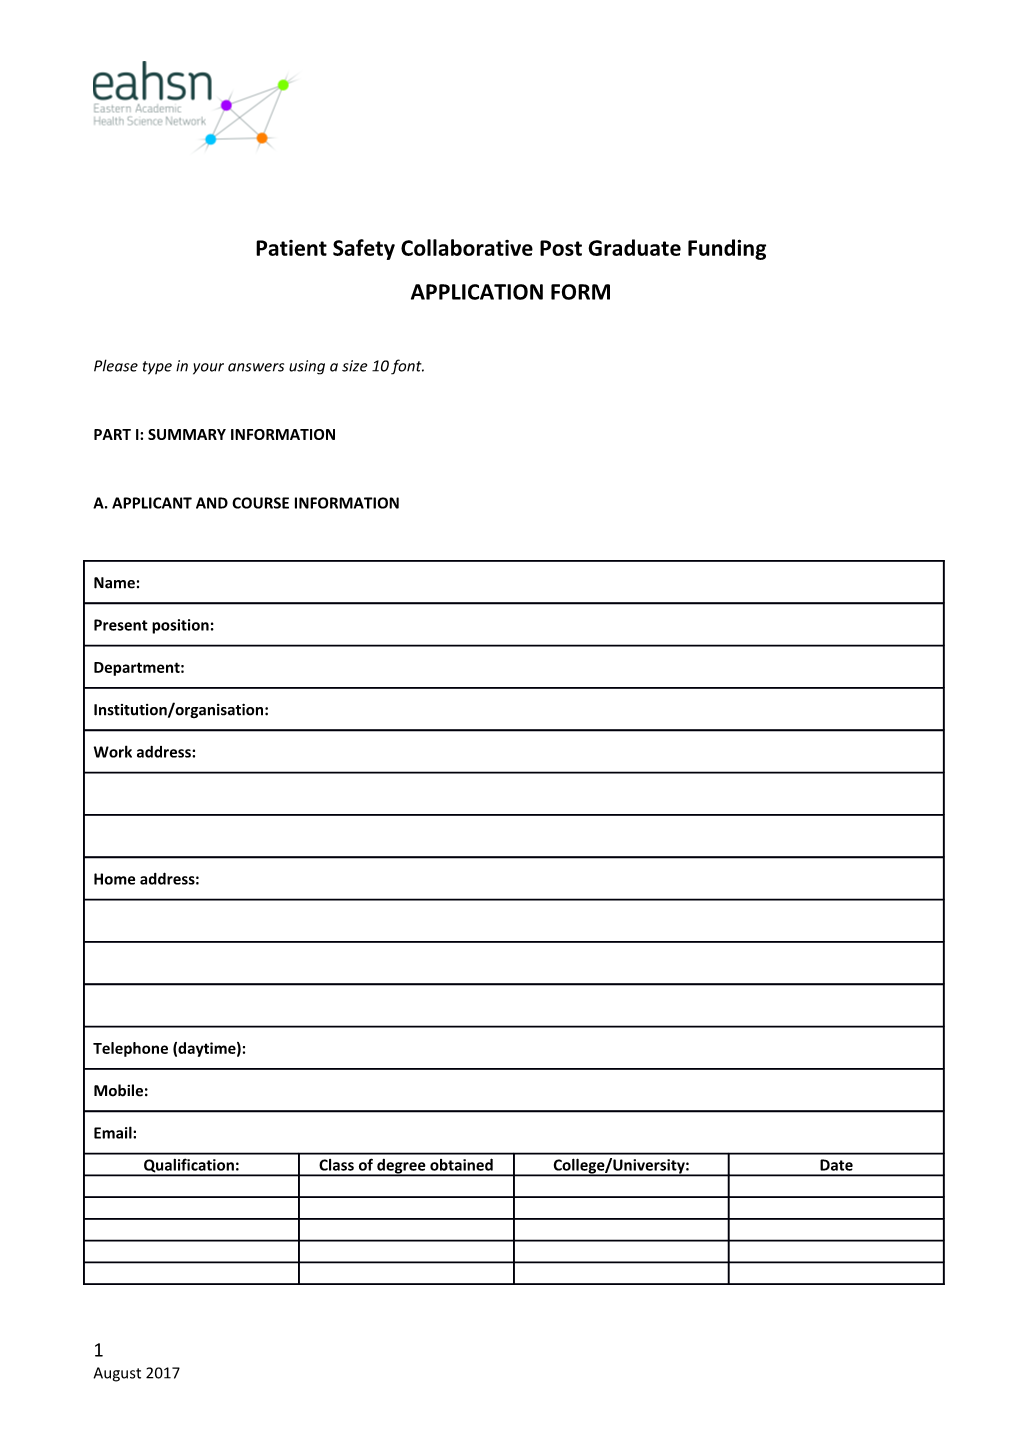 Patient Safety Collaborative Post Graduate Funding